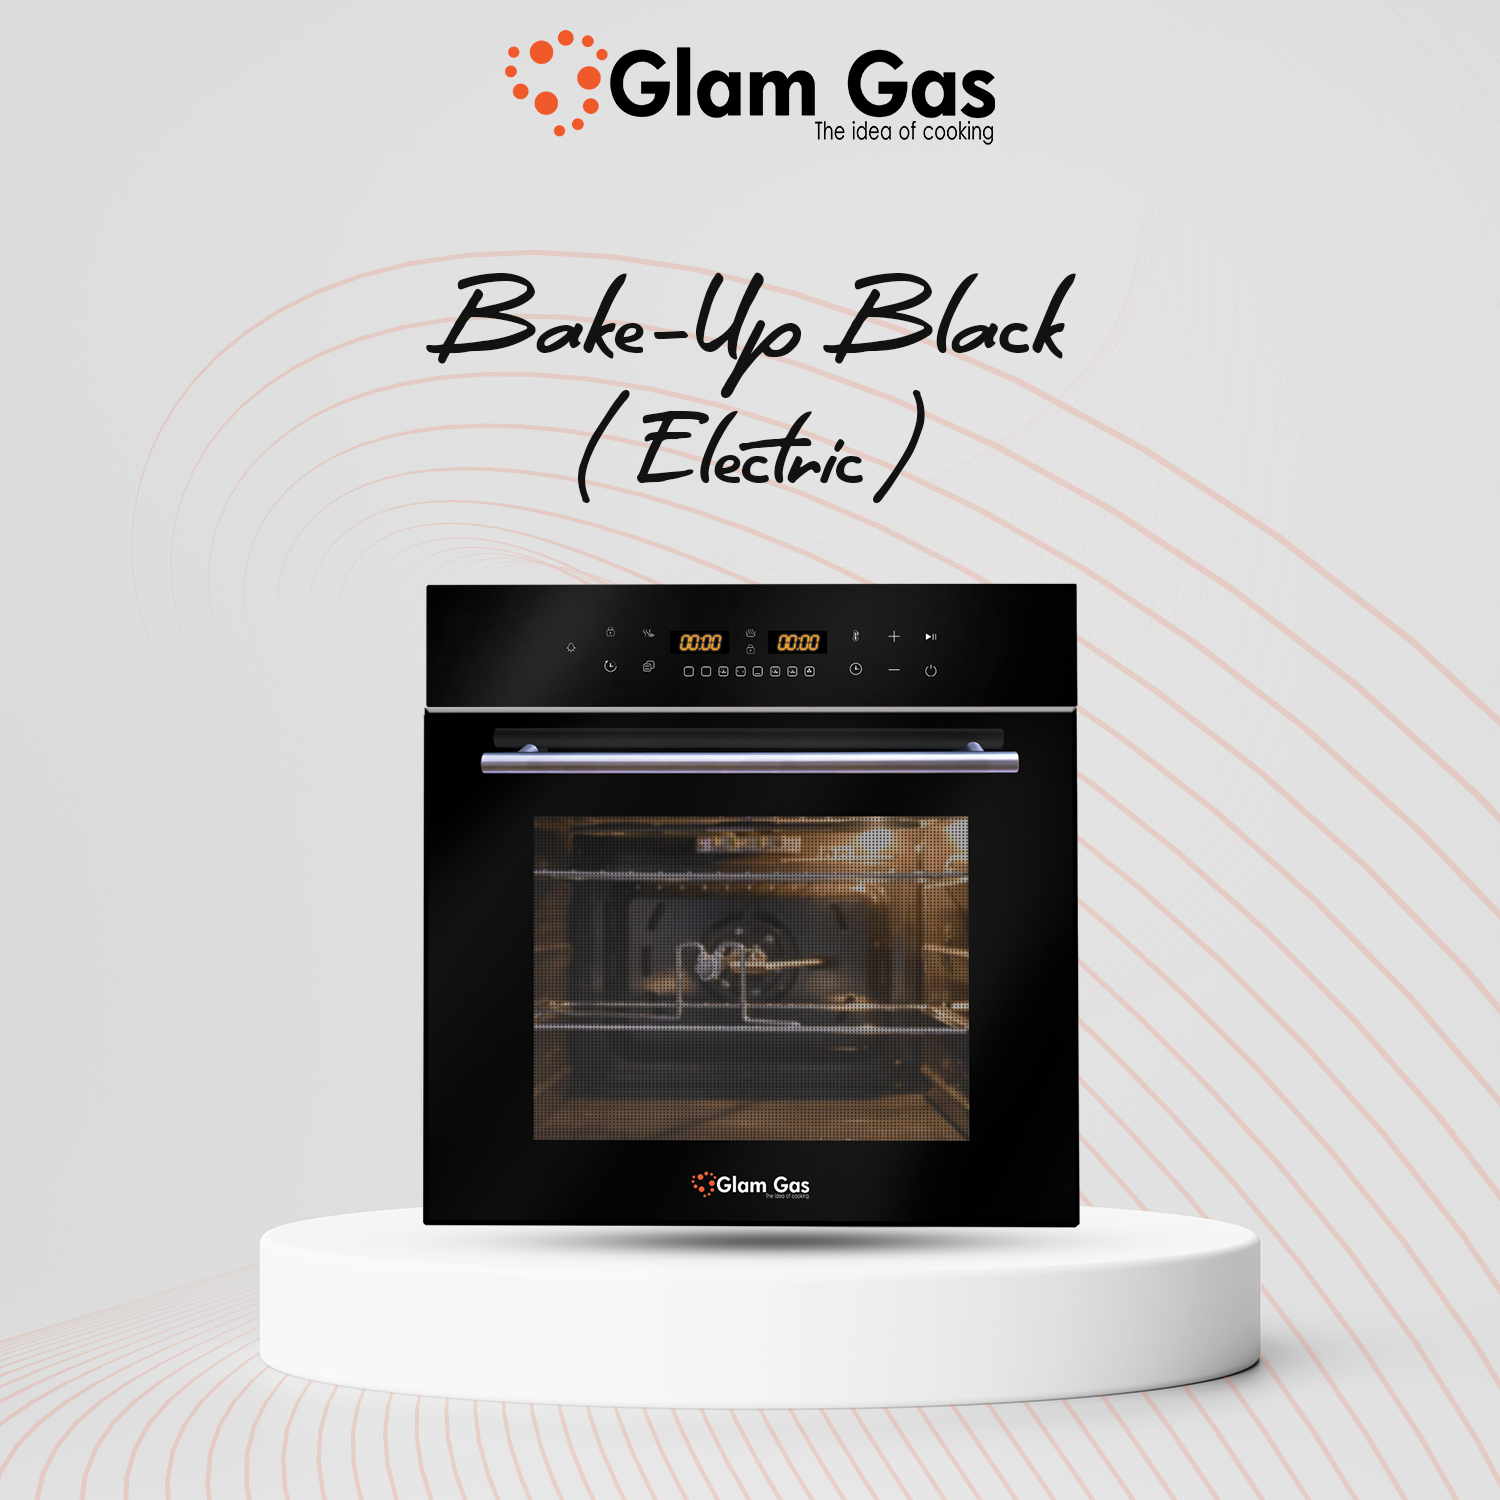 Glam Gas	Oven Bake up Electric